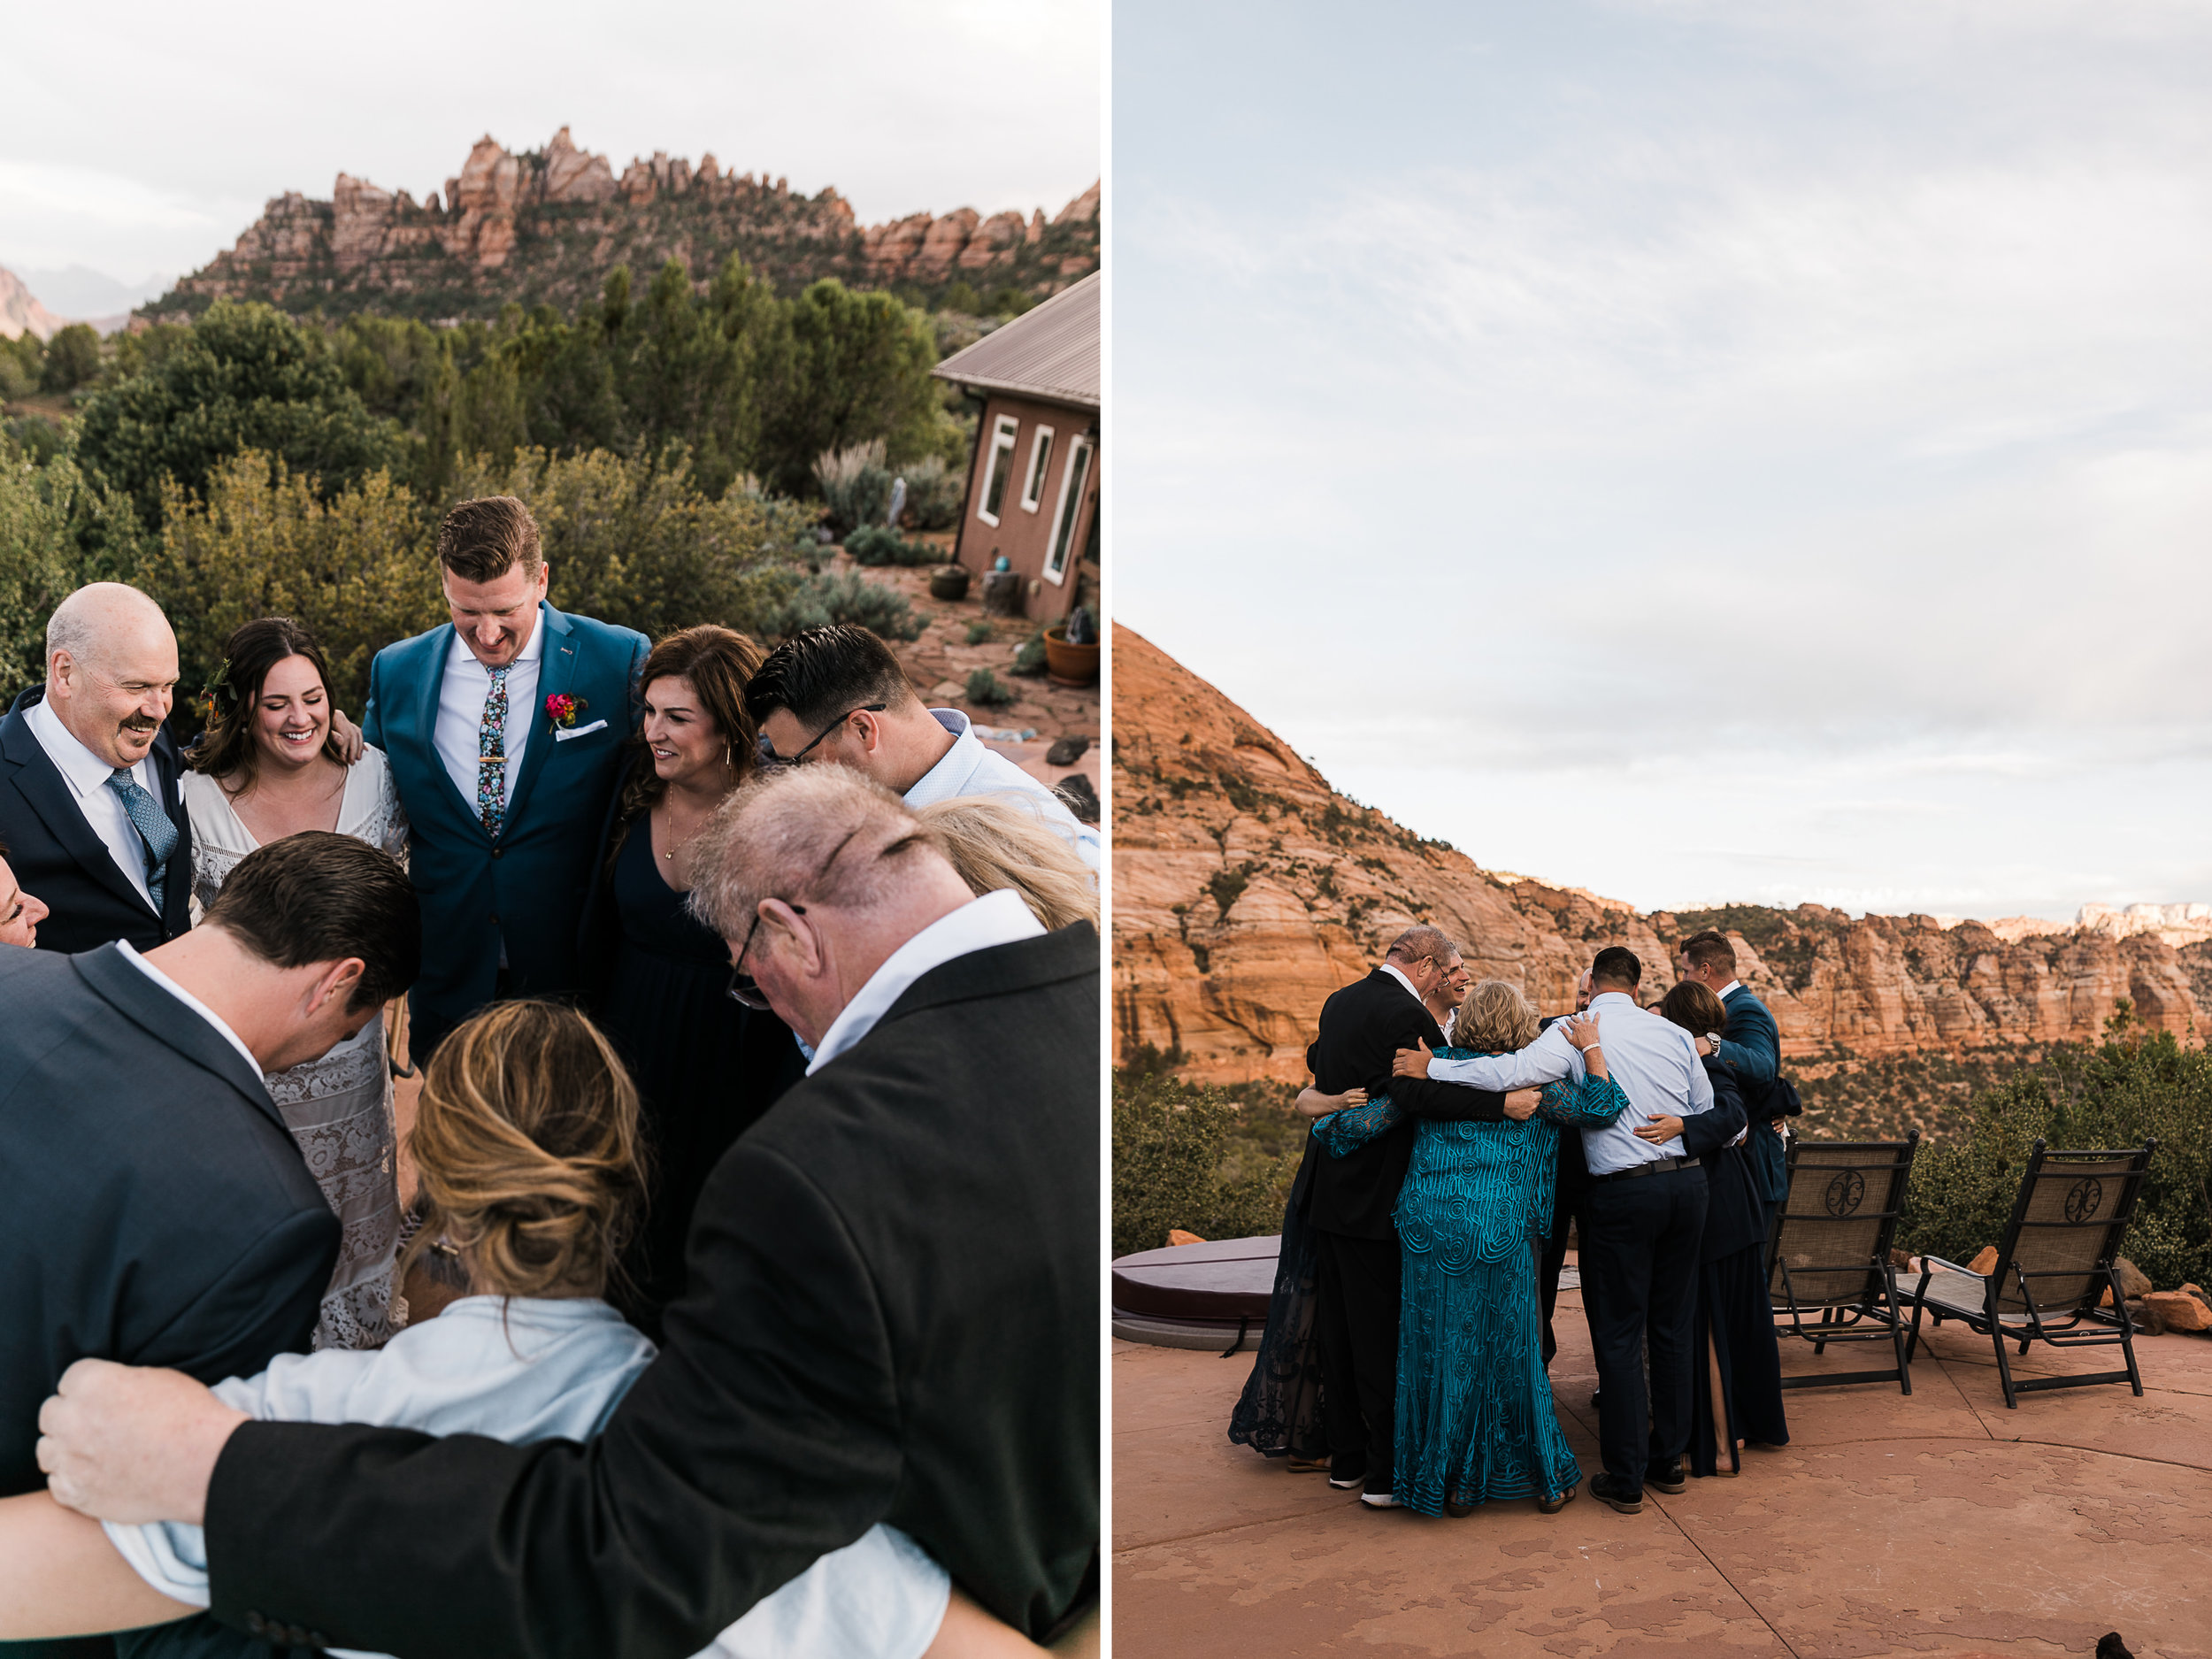 Zion national park elopement photographer | intimate wedding in the desert | small wedding ideas | the hearnes adventure photography